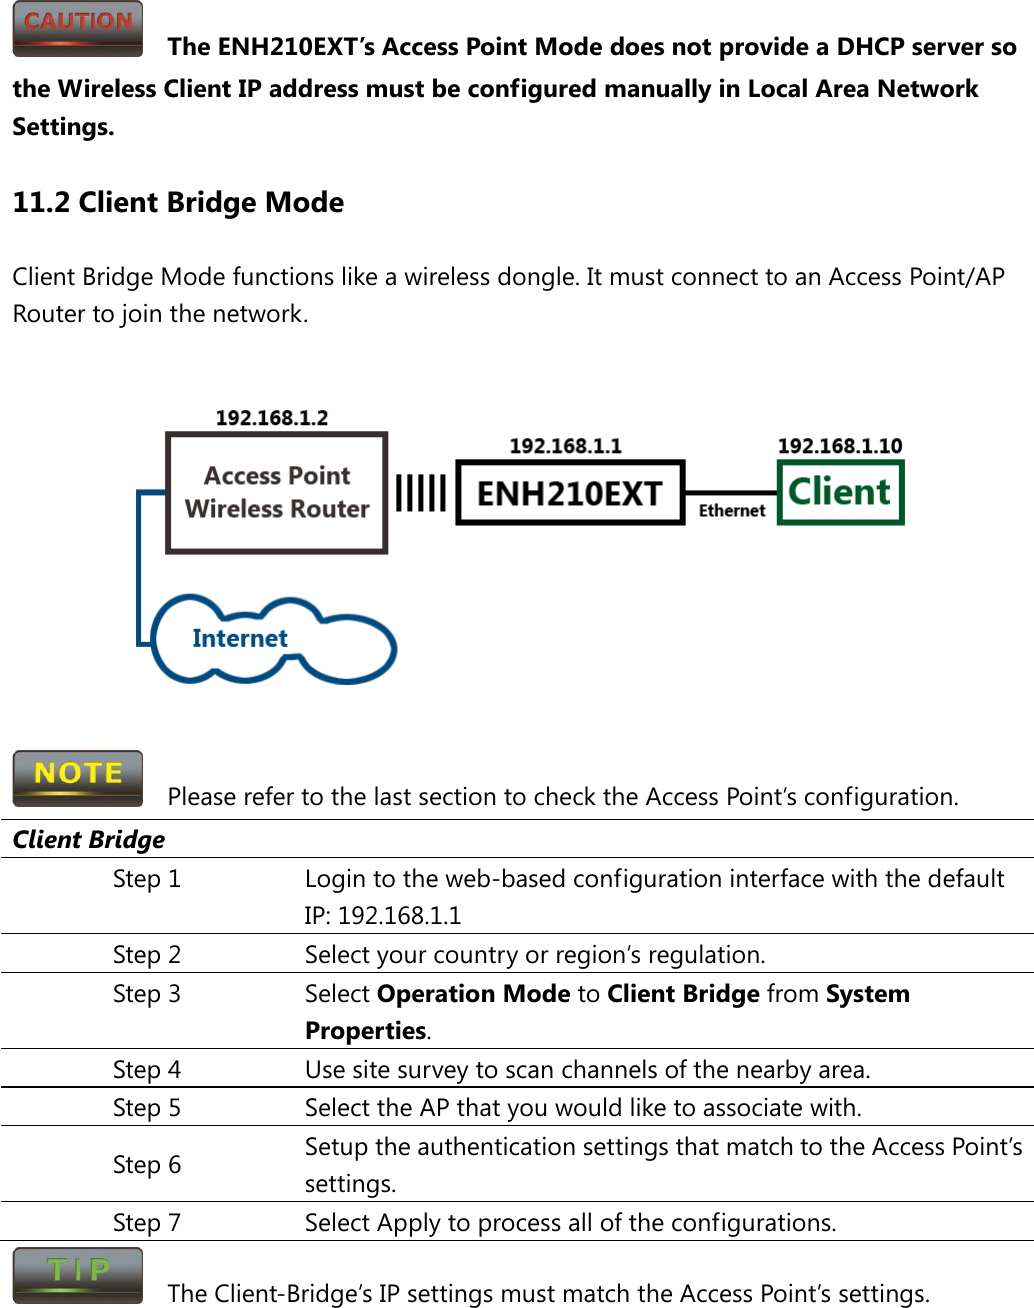   The ENH210EXT’s Access Point Mode does not provide a DHCP server so the Wireless Client IP address must be configured manually in Local Area Network Settings. 11.2 Client Bridge Mode Client Bridge Mode functions like a wireless dongle. It must connect to an Access Point/AP Router to join the network.       Please refer to the last section to check the Access Point’s configuration. Client Bridge Step 1 Login to the web-based configuration interface with the default IP: 192.168.1.1 Step 2 Select your country or region’s regulation. Step 3 Select Operation Mode to Client Bridge from System Properties. Step 4 Use site survey to scan channels of the nearby area. Step 5 Select the AP that you would like to associate with. Step 6 Setup the authentication settings that match to the Access Point’s settings. Step 7  Select Apply to process all of the configurations.   The Client-Bridge’s IP settings must match the Access Point’s settings.  